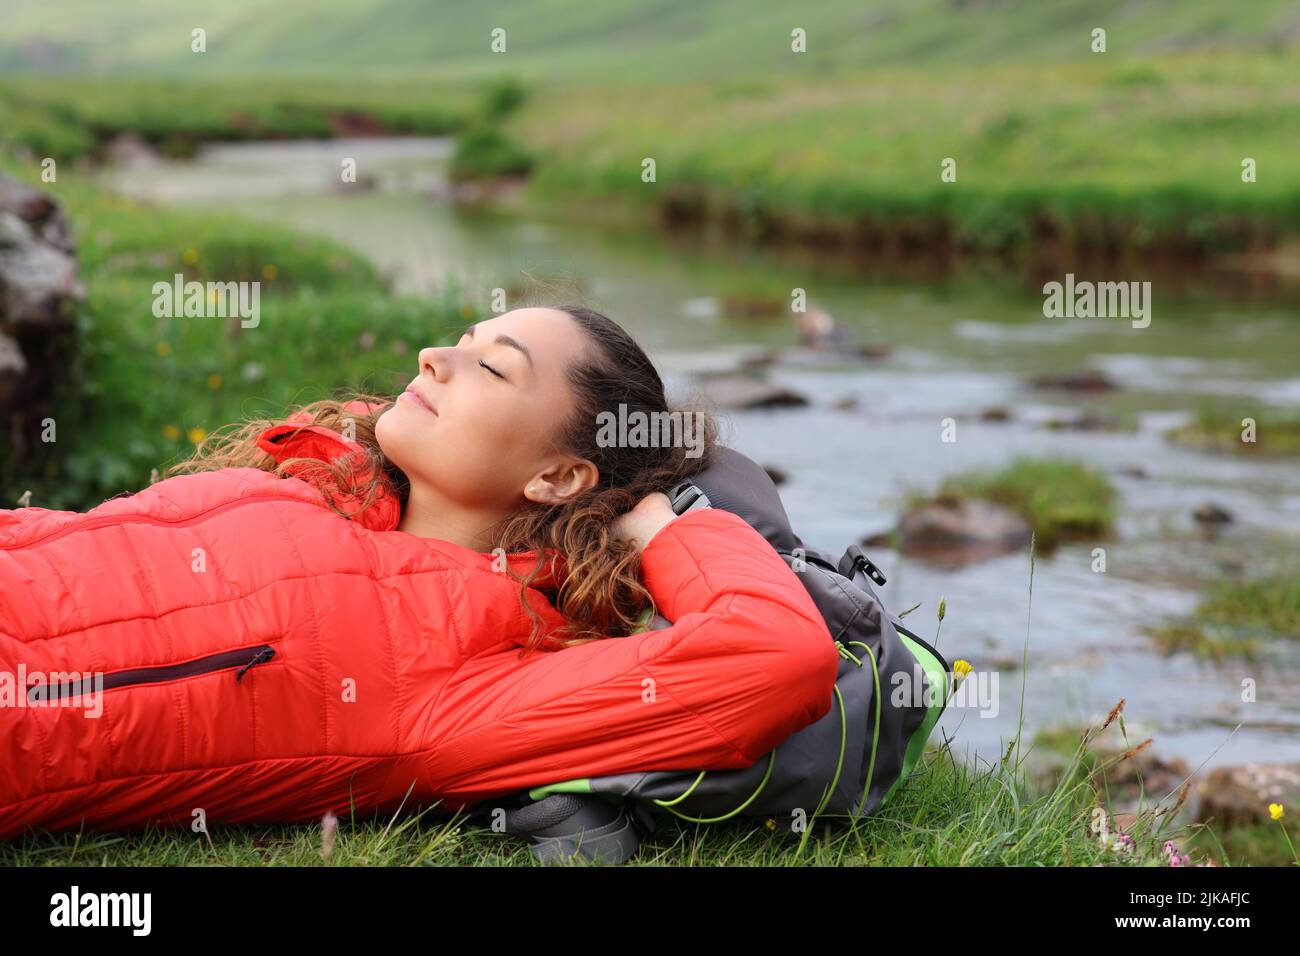 Hiker resting lying in a riverside Stock Photo